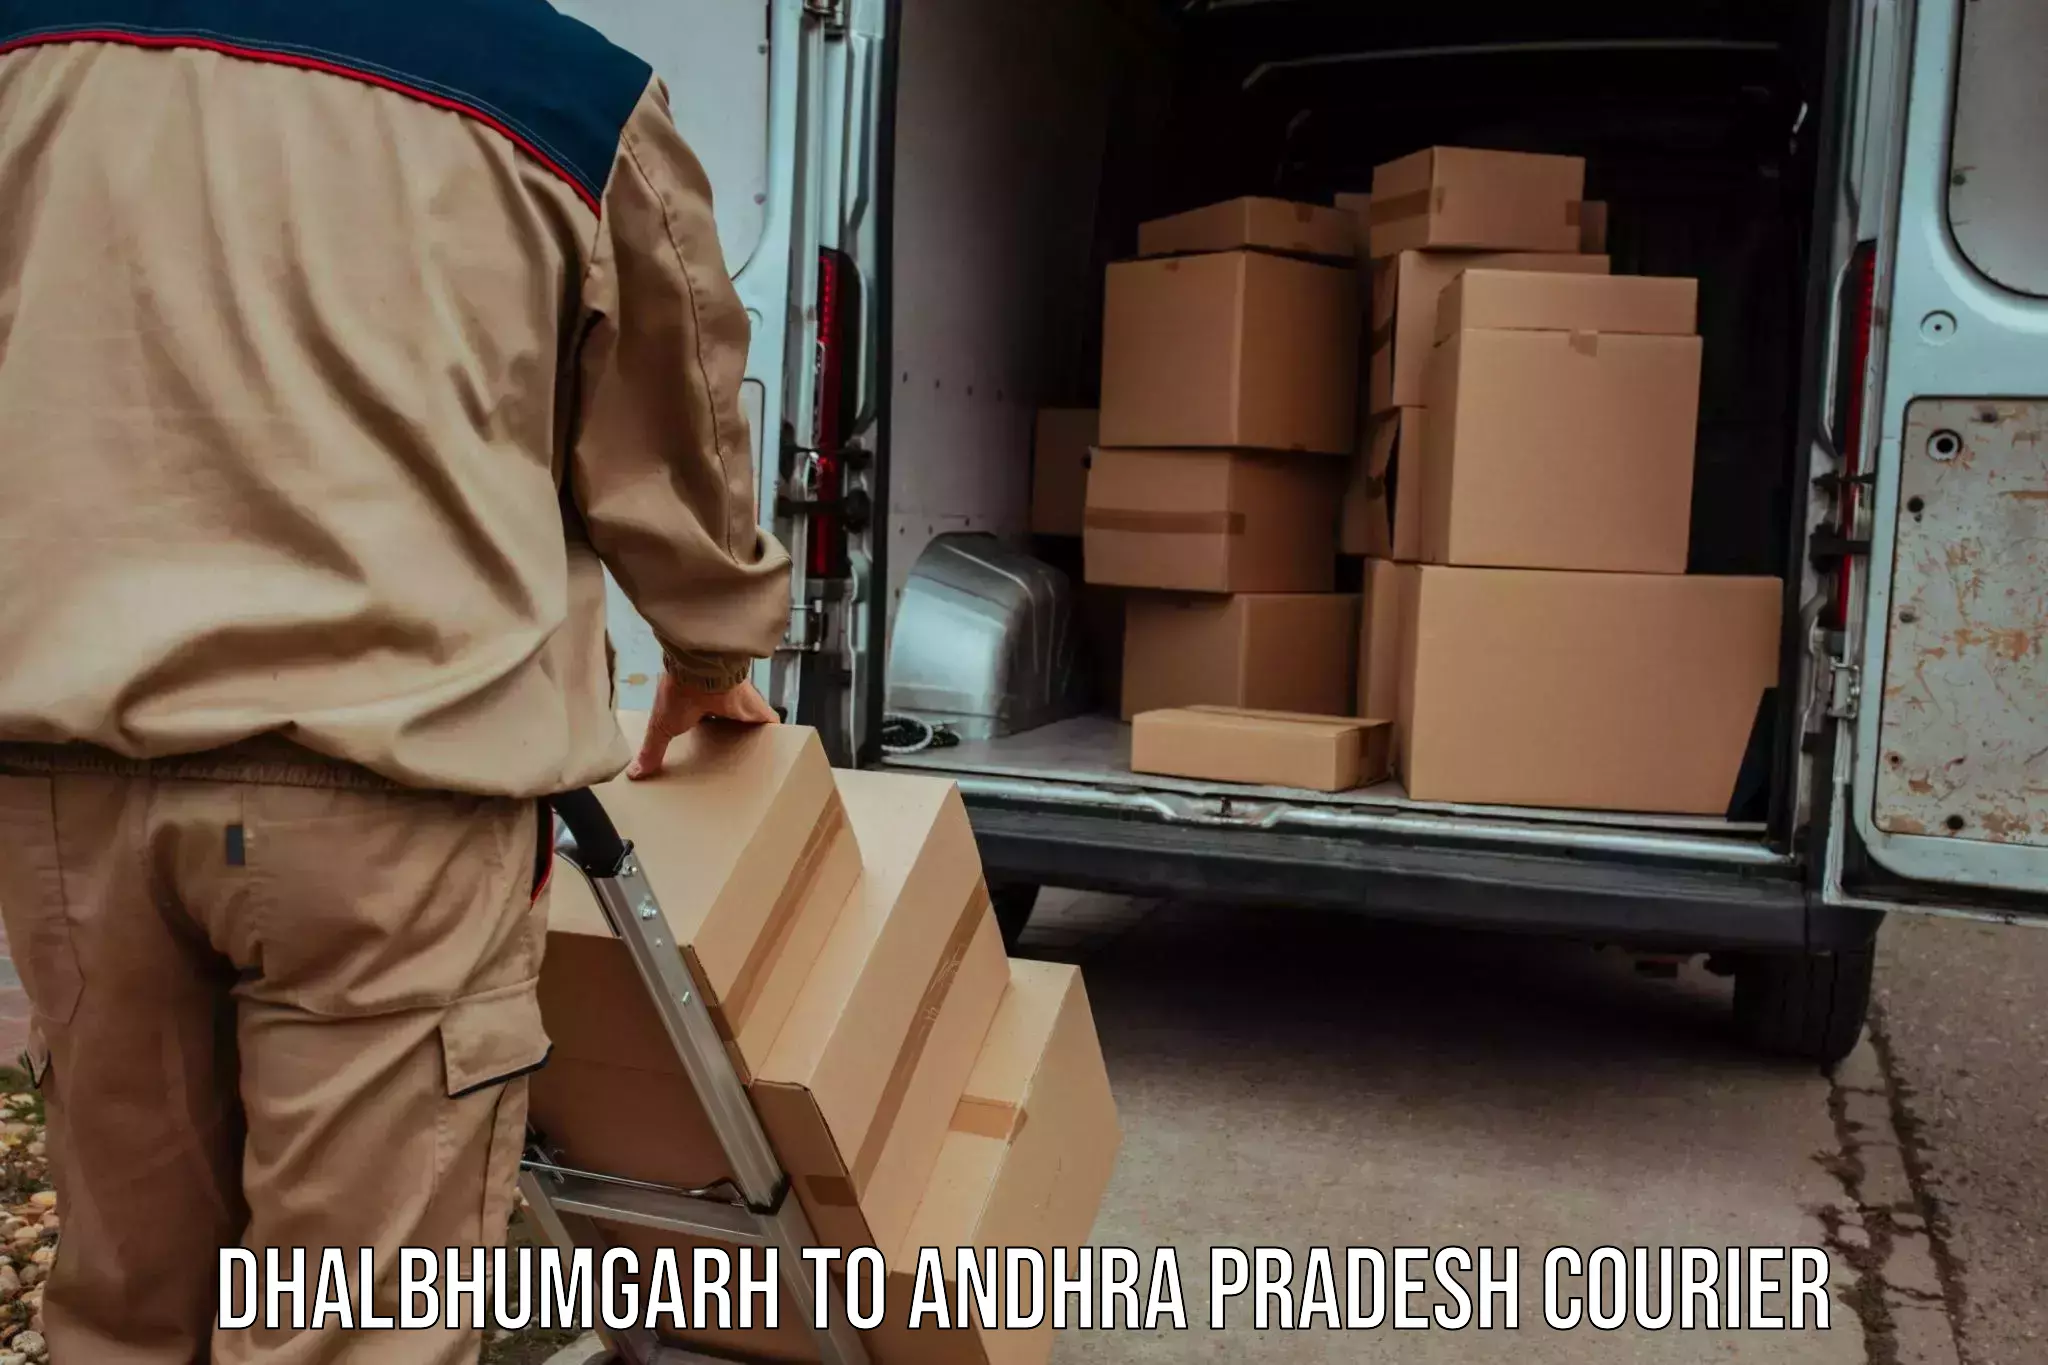 State-of-the-art courier technology Dhalbhumgarh to Pedapadu